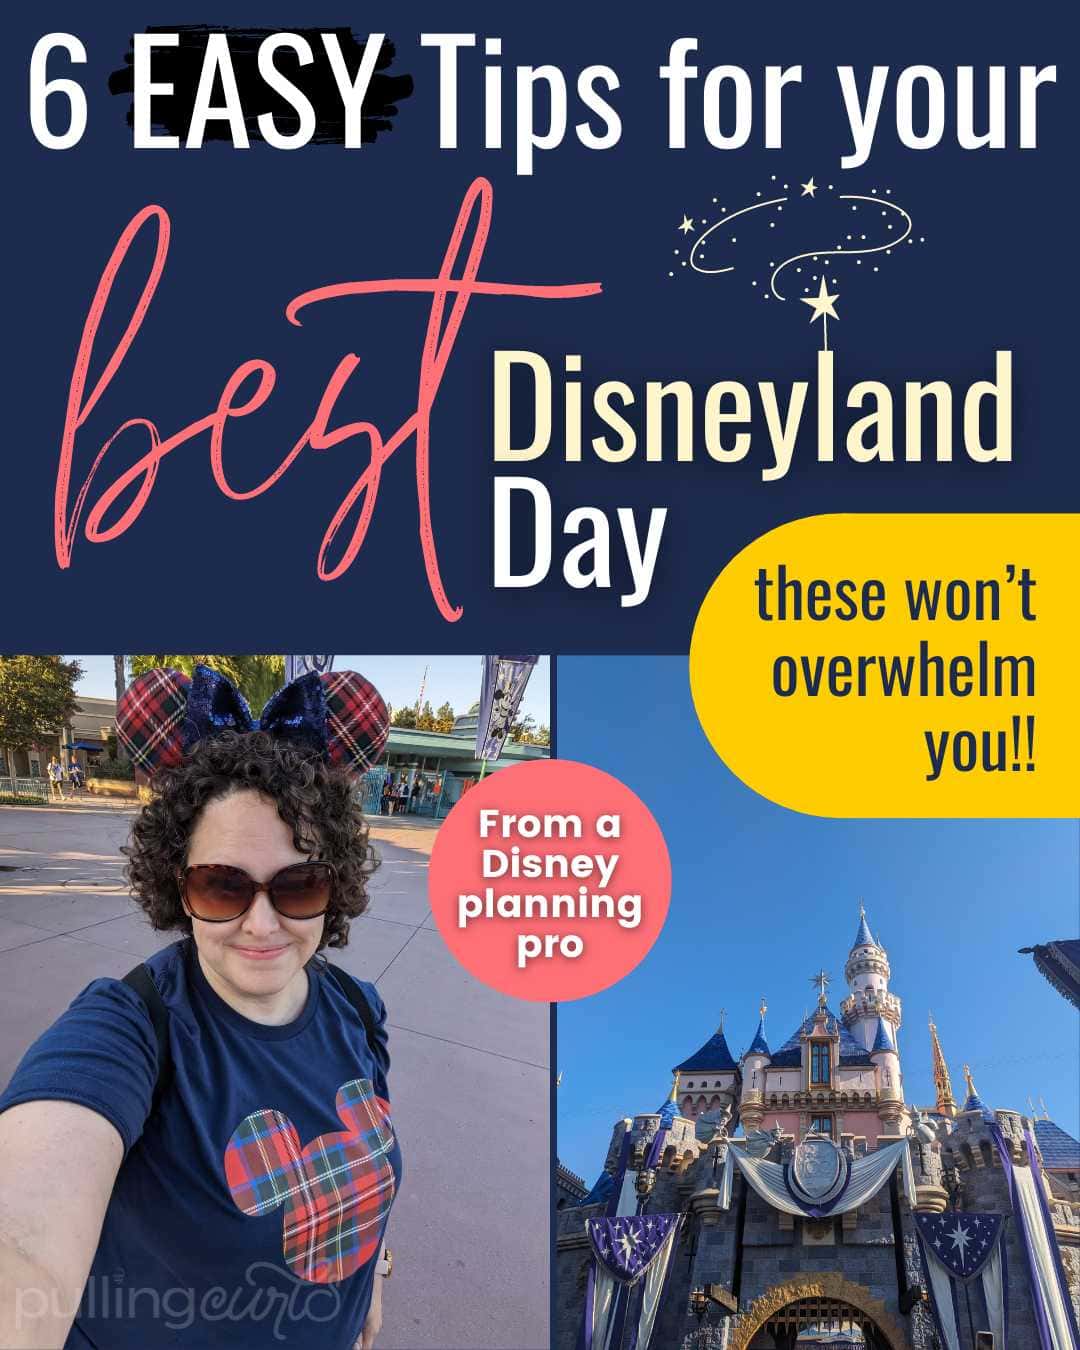 Tired of spending your Disneyland vacation in long lines and unprepared for the day? Check out our foolproof tips for a magical day at Disneyland Resort. From leveraging the power of the Lightening Lane to the best ways to fill your energy tank, we've got you covered! via @pullingcurls